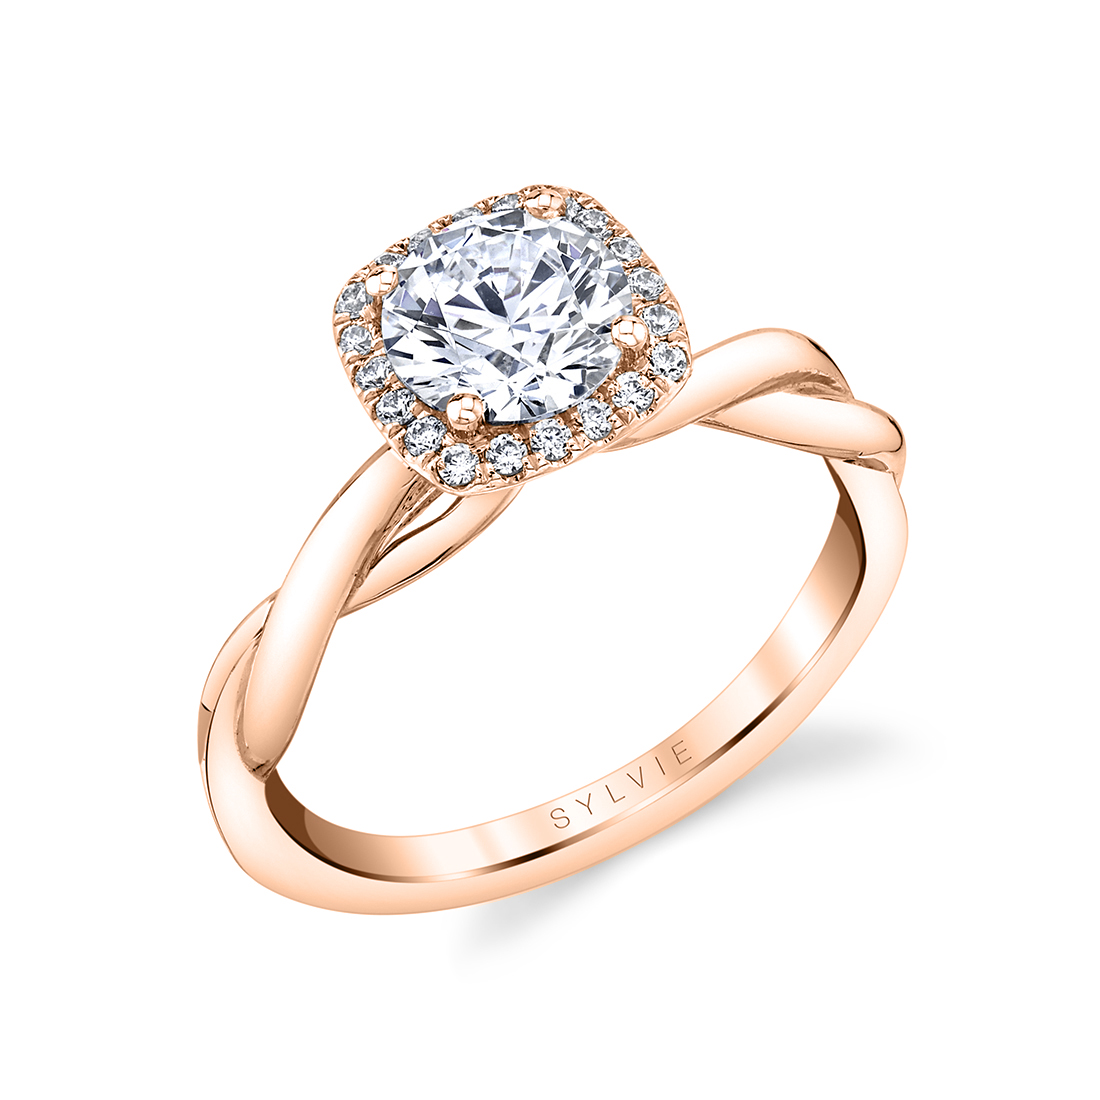 cushion halo engagement ring with spiral band in rose gold